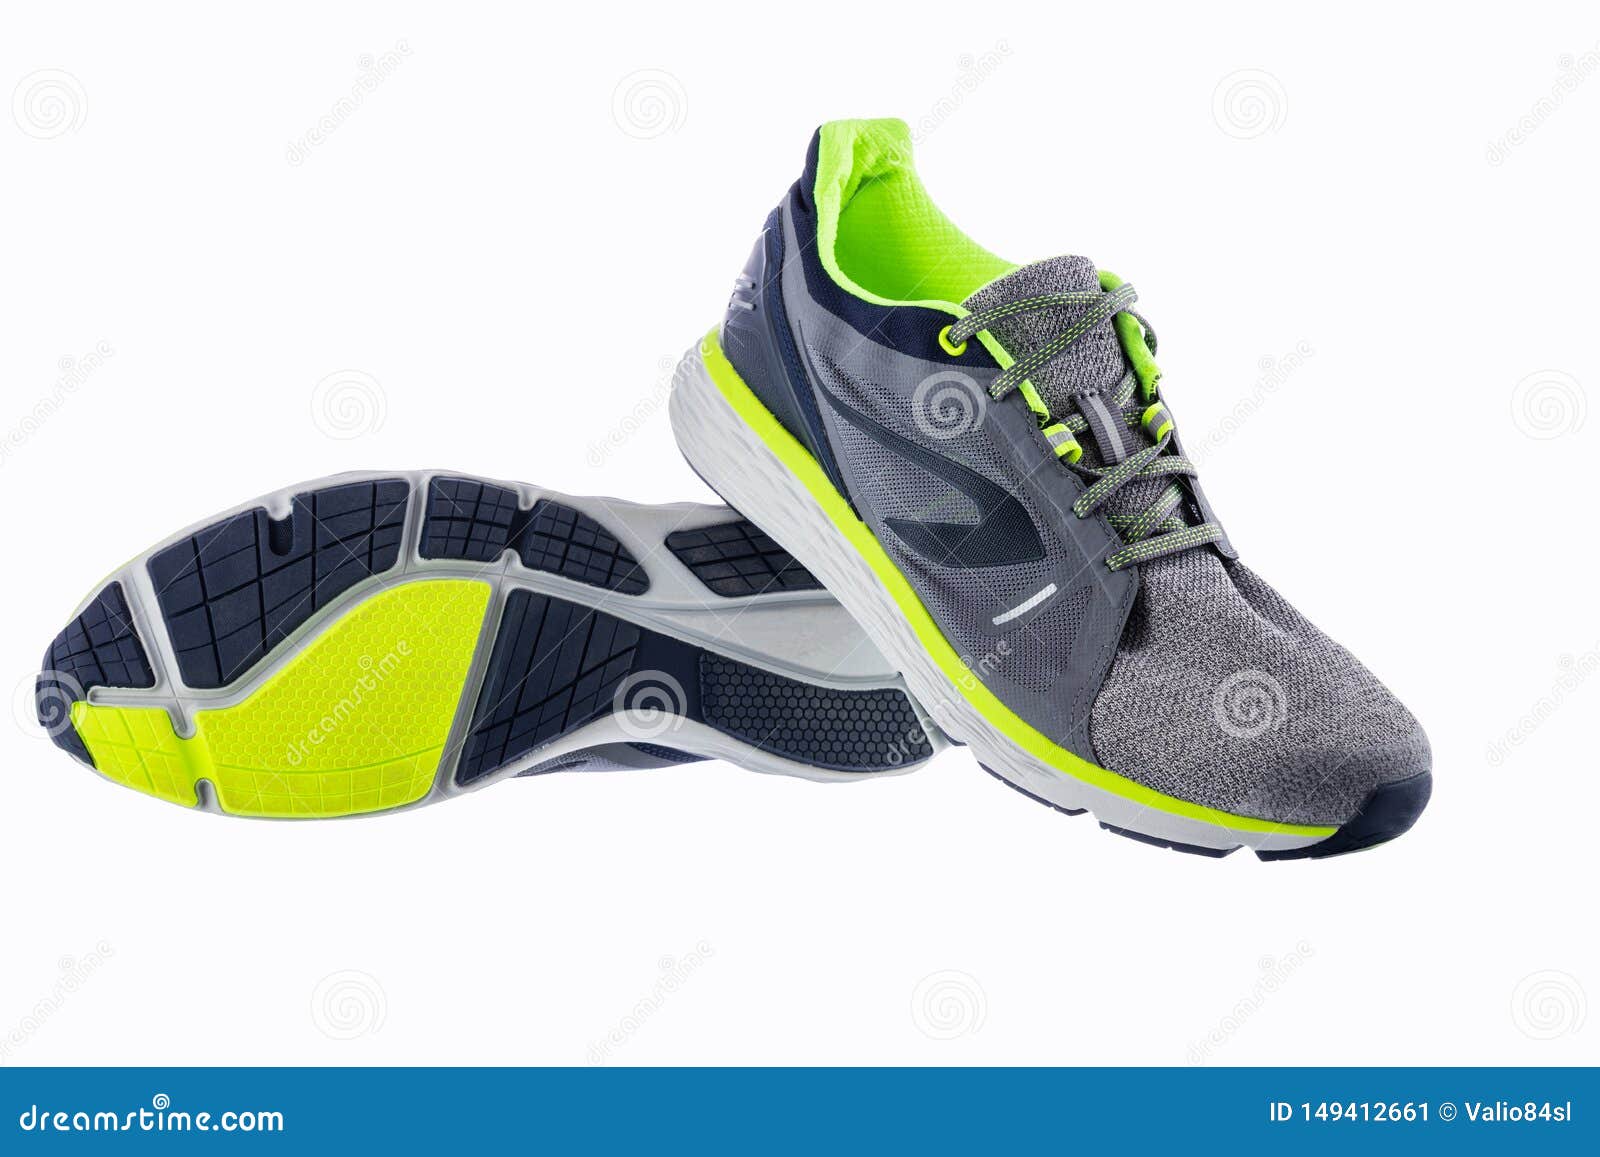 Runing Sport Shoes Isolated on White Background Stock Image - Image of ...